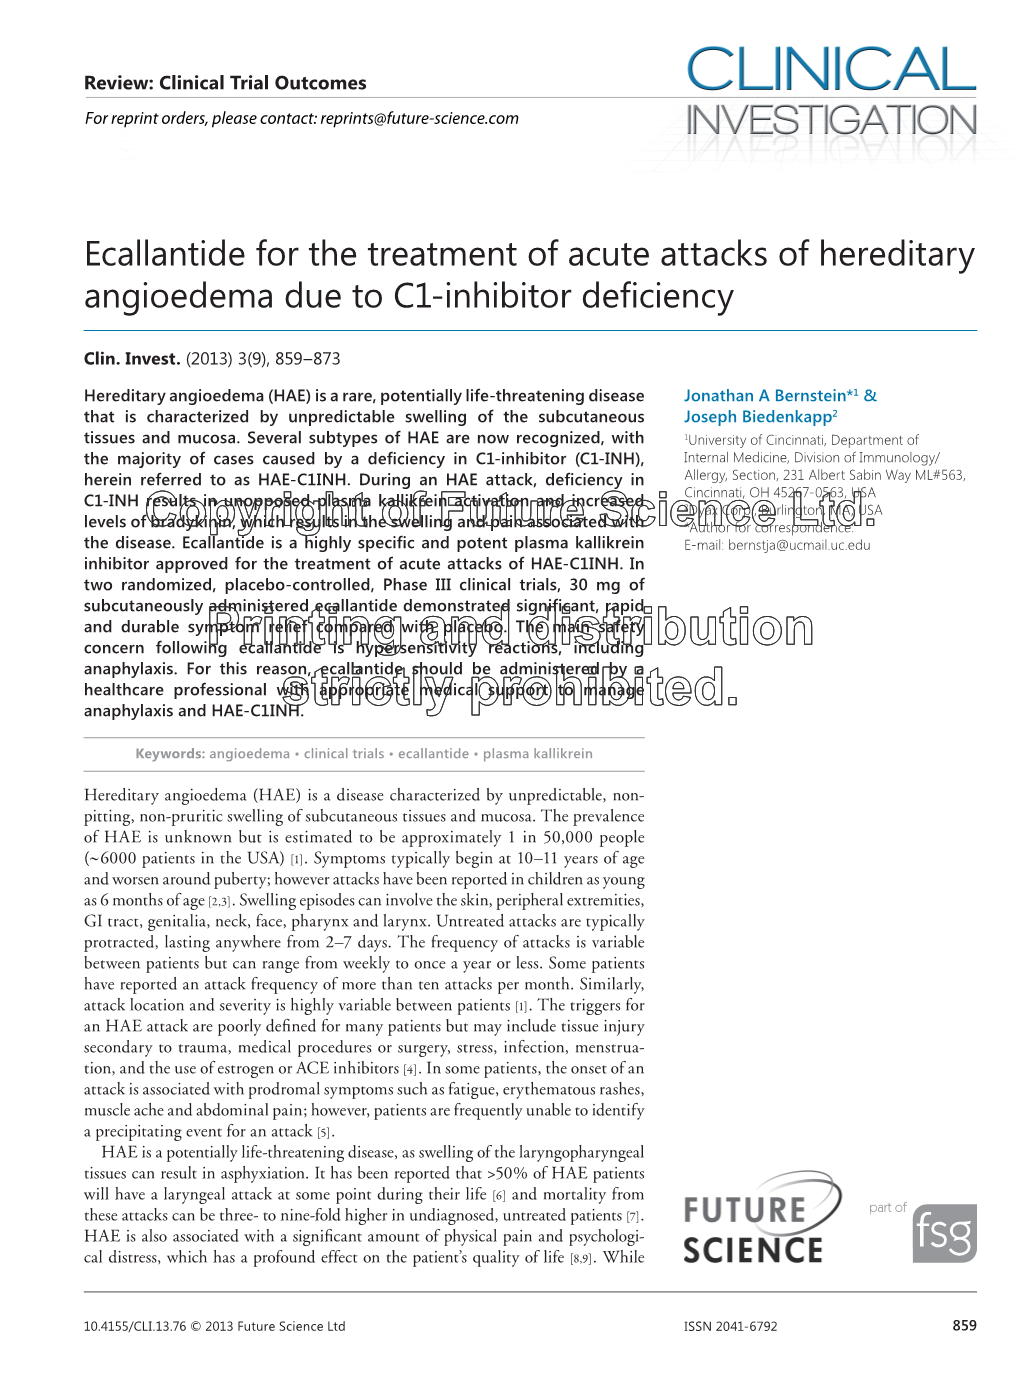 Ecallantide for the Treatment of Acute Attacks of Hereditary Angioedema Due to C1-Inhibitor Deficiency